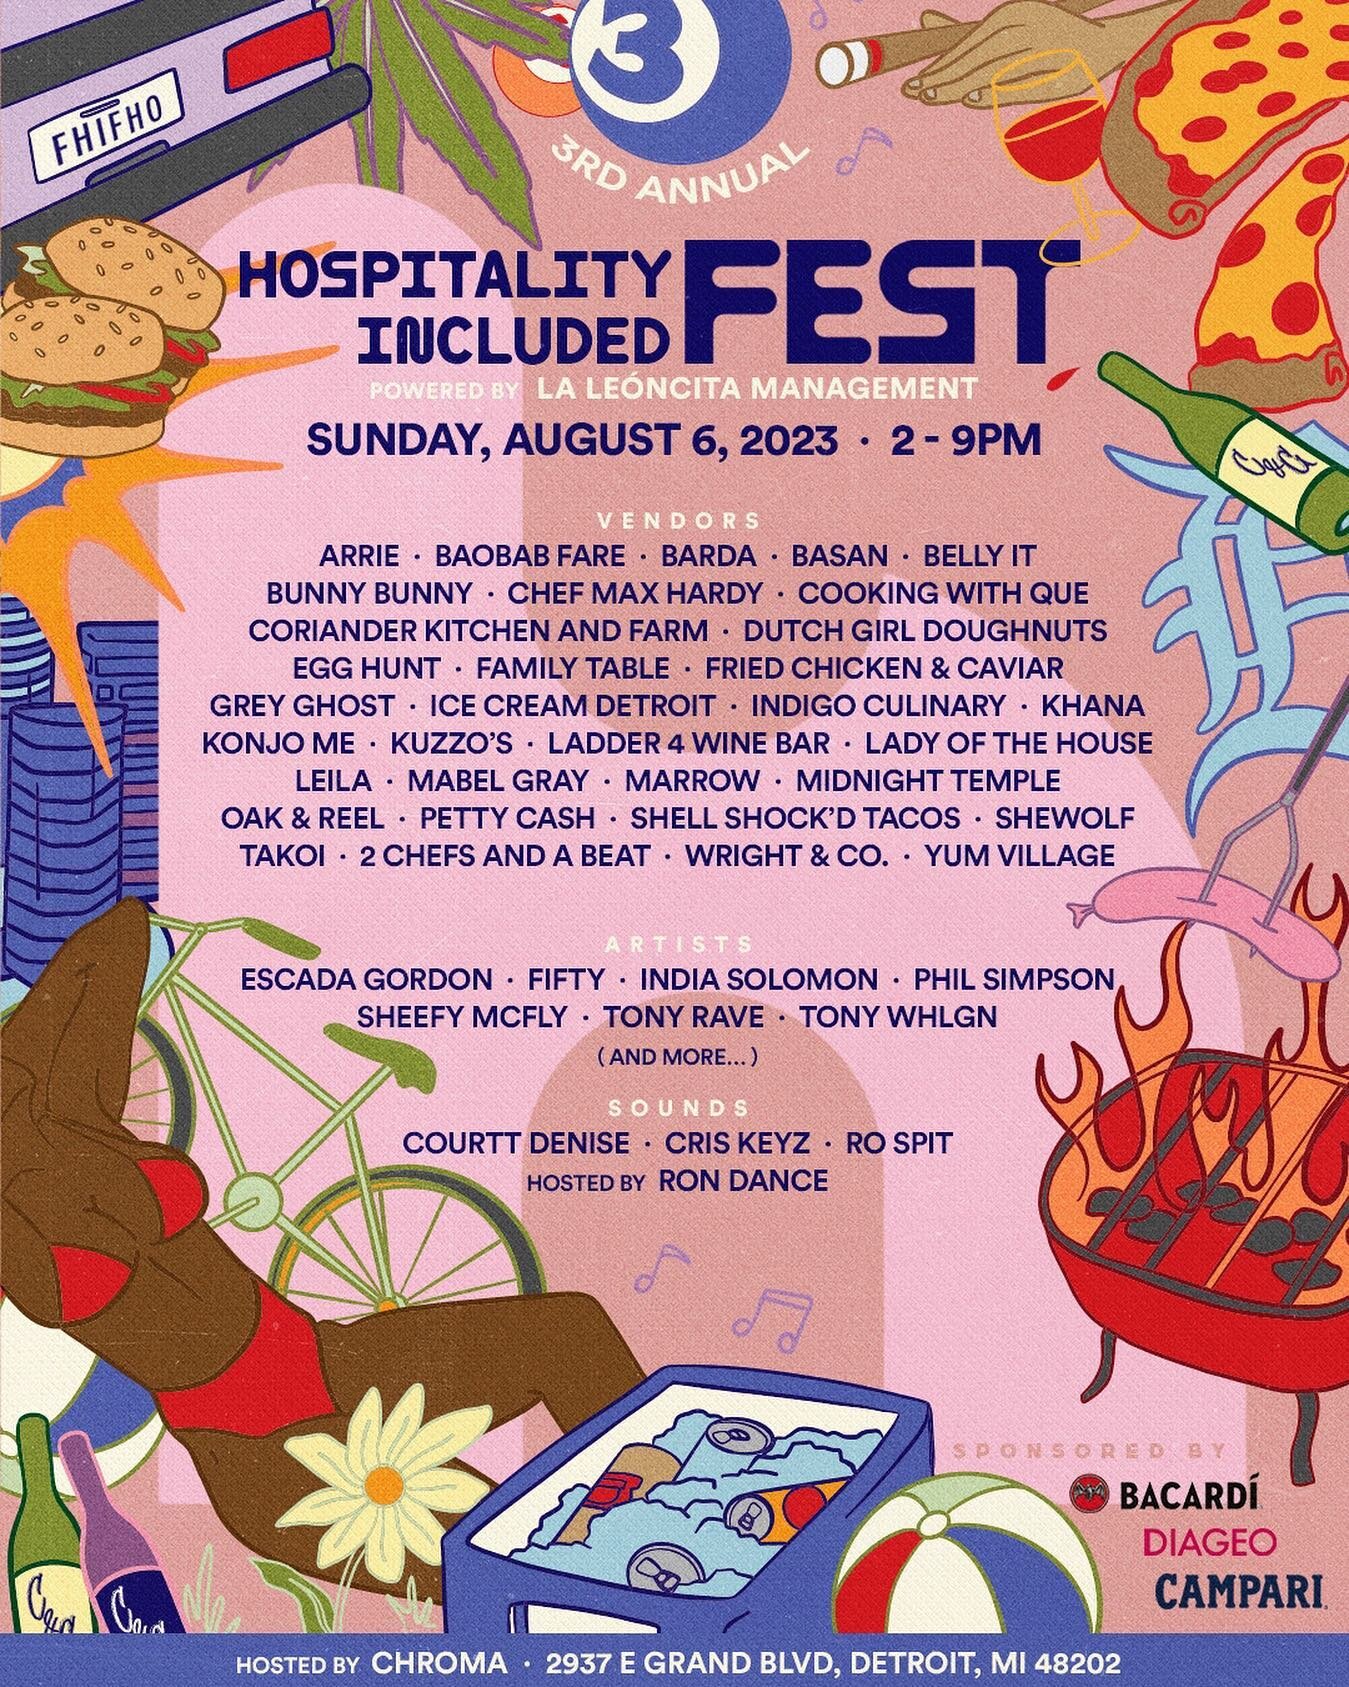 So excited to be part of the 3rd Annual @hosp.included Hospitality Fest on Sunday, August 6th from 2PM-9PM! ⁠
⁠
Meet us in the @chromadet festival lot, where you can eat your way through some of the best food this city has to offer! ⁠
⁠
⁠
⁠
⁠
.⁠
.⁠
.